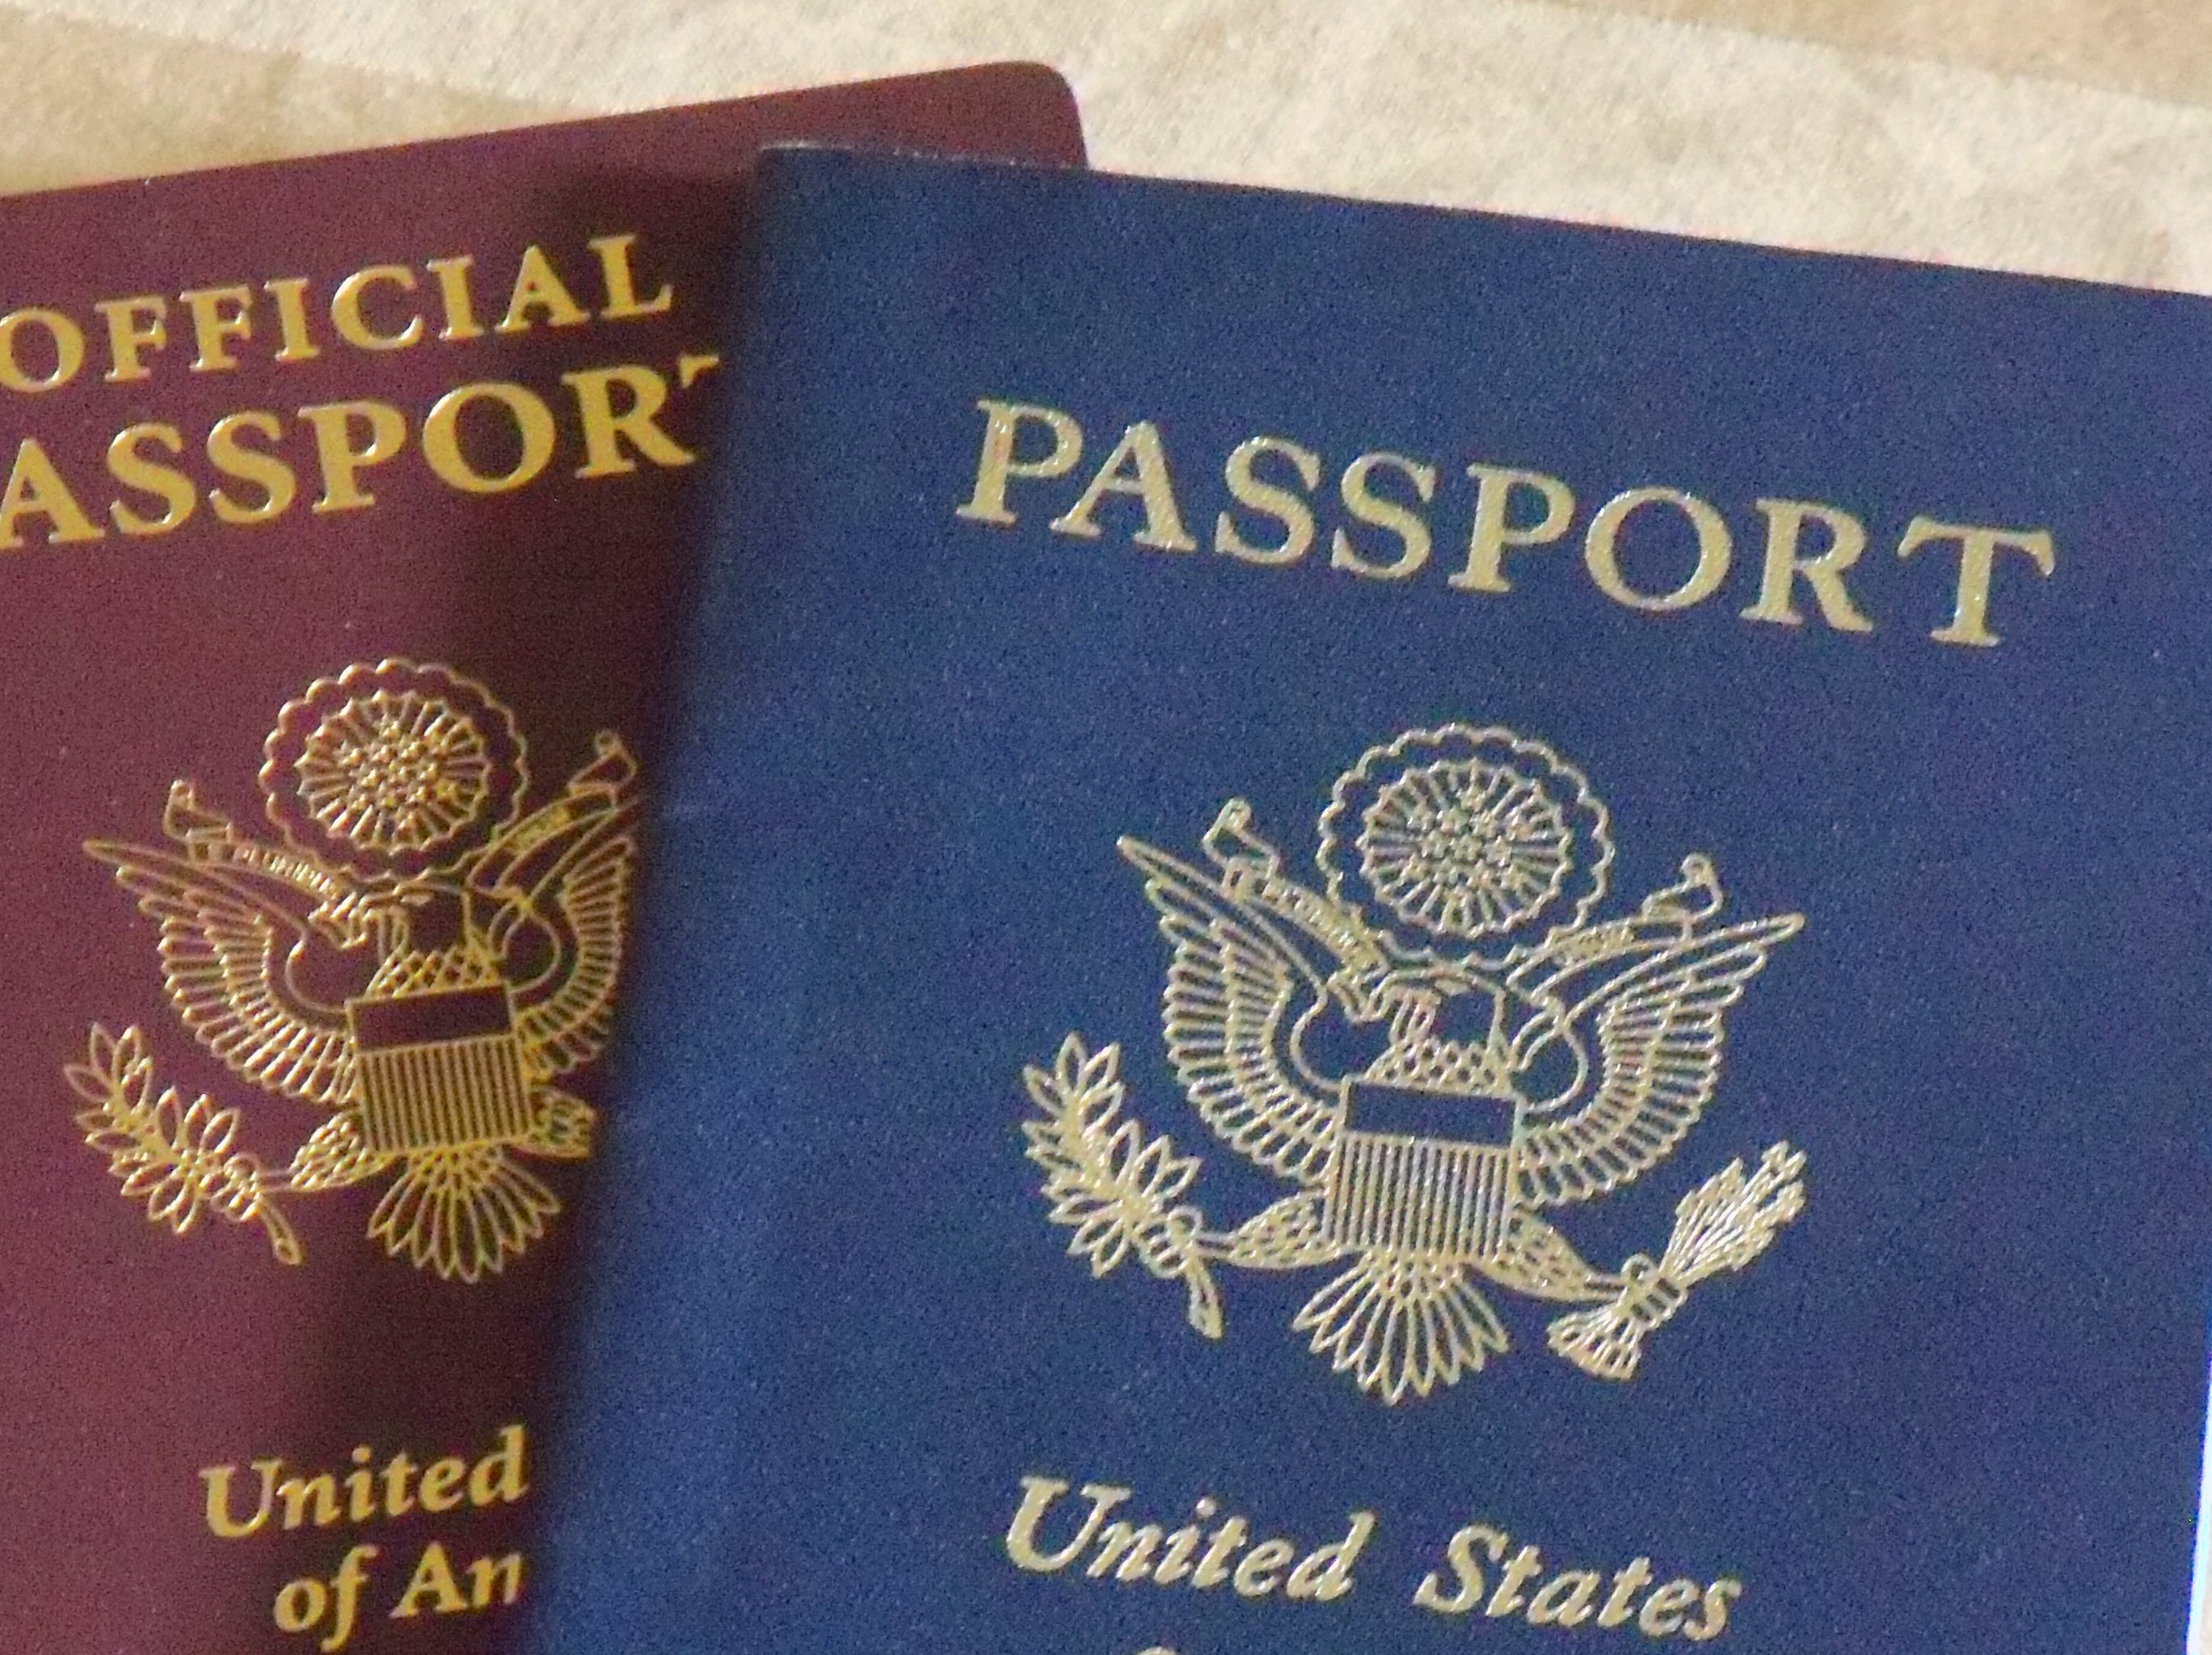 NoFee Passports and Tourist Passports, What is the Difference